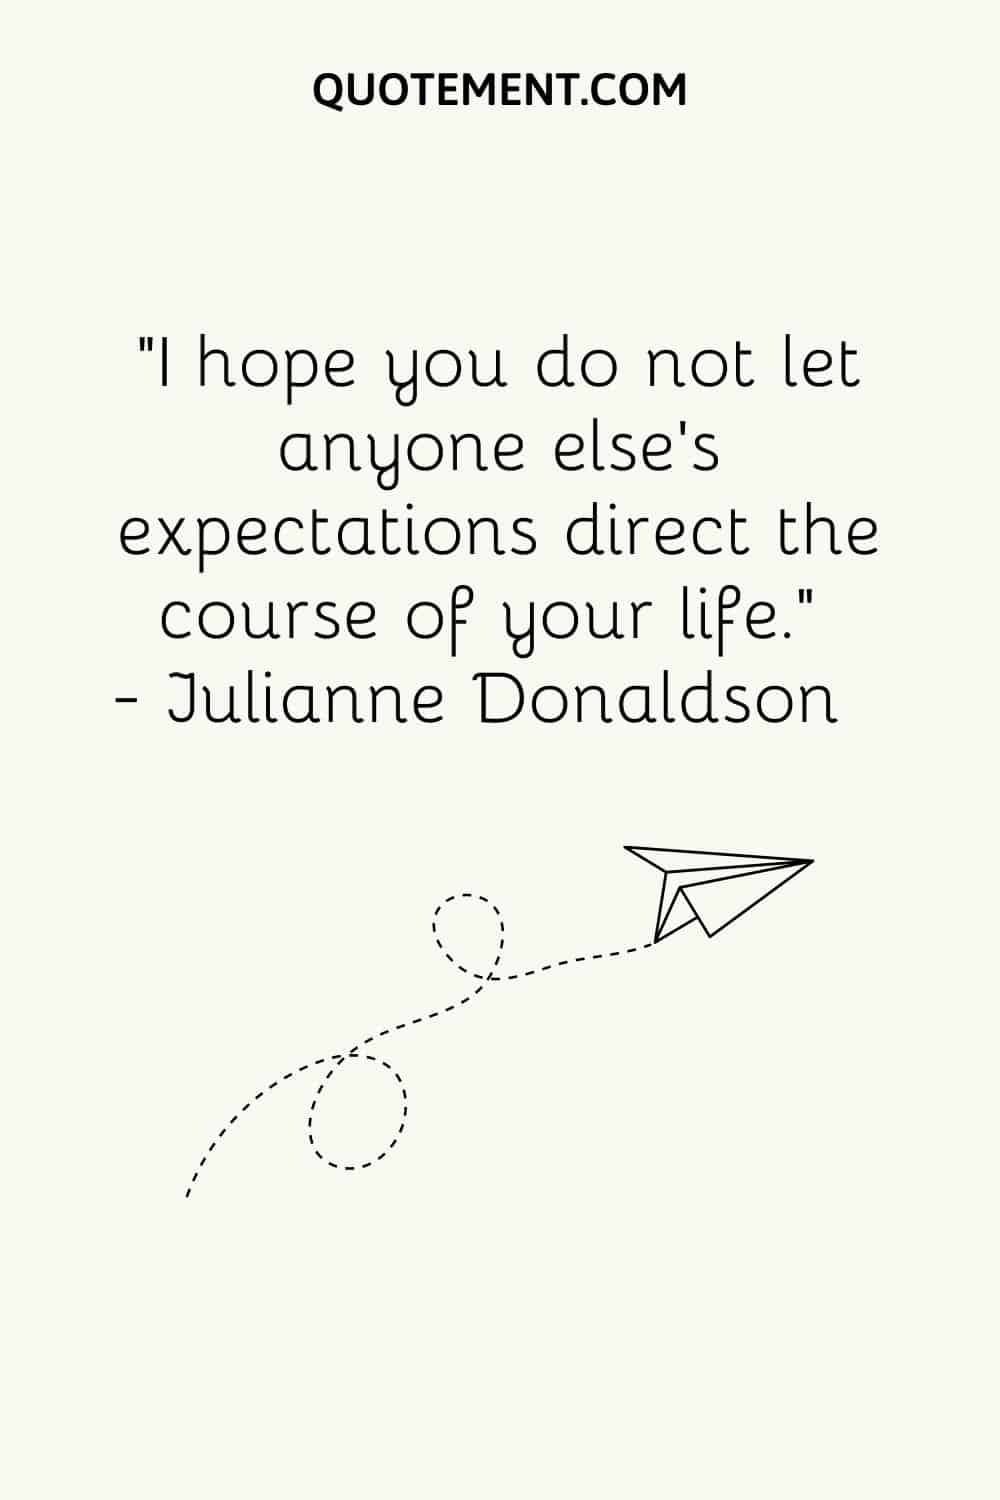 I hope you do not let anyone else’s expectations direct the course of your life.